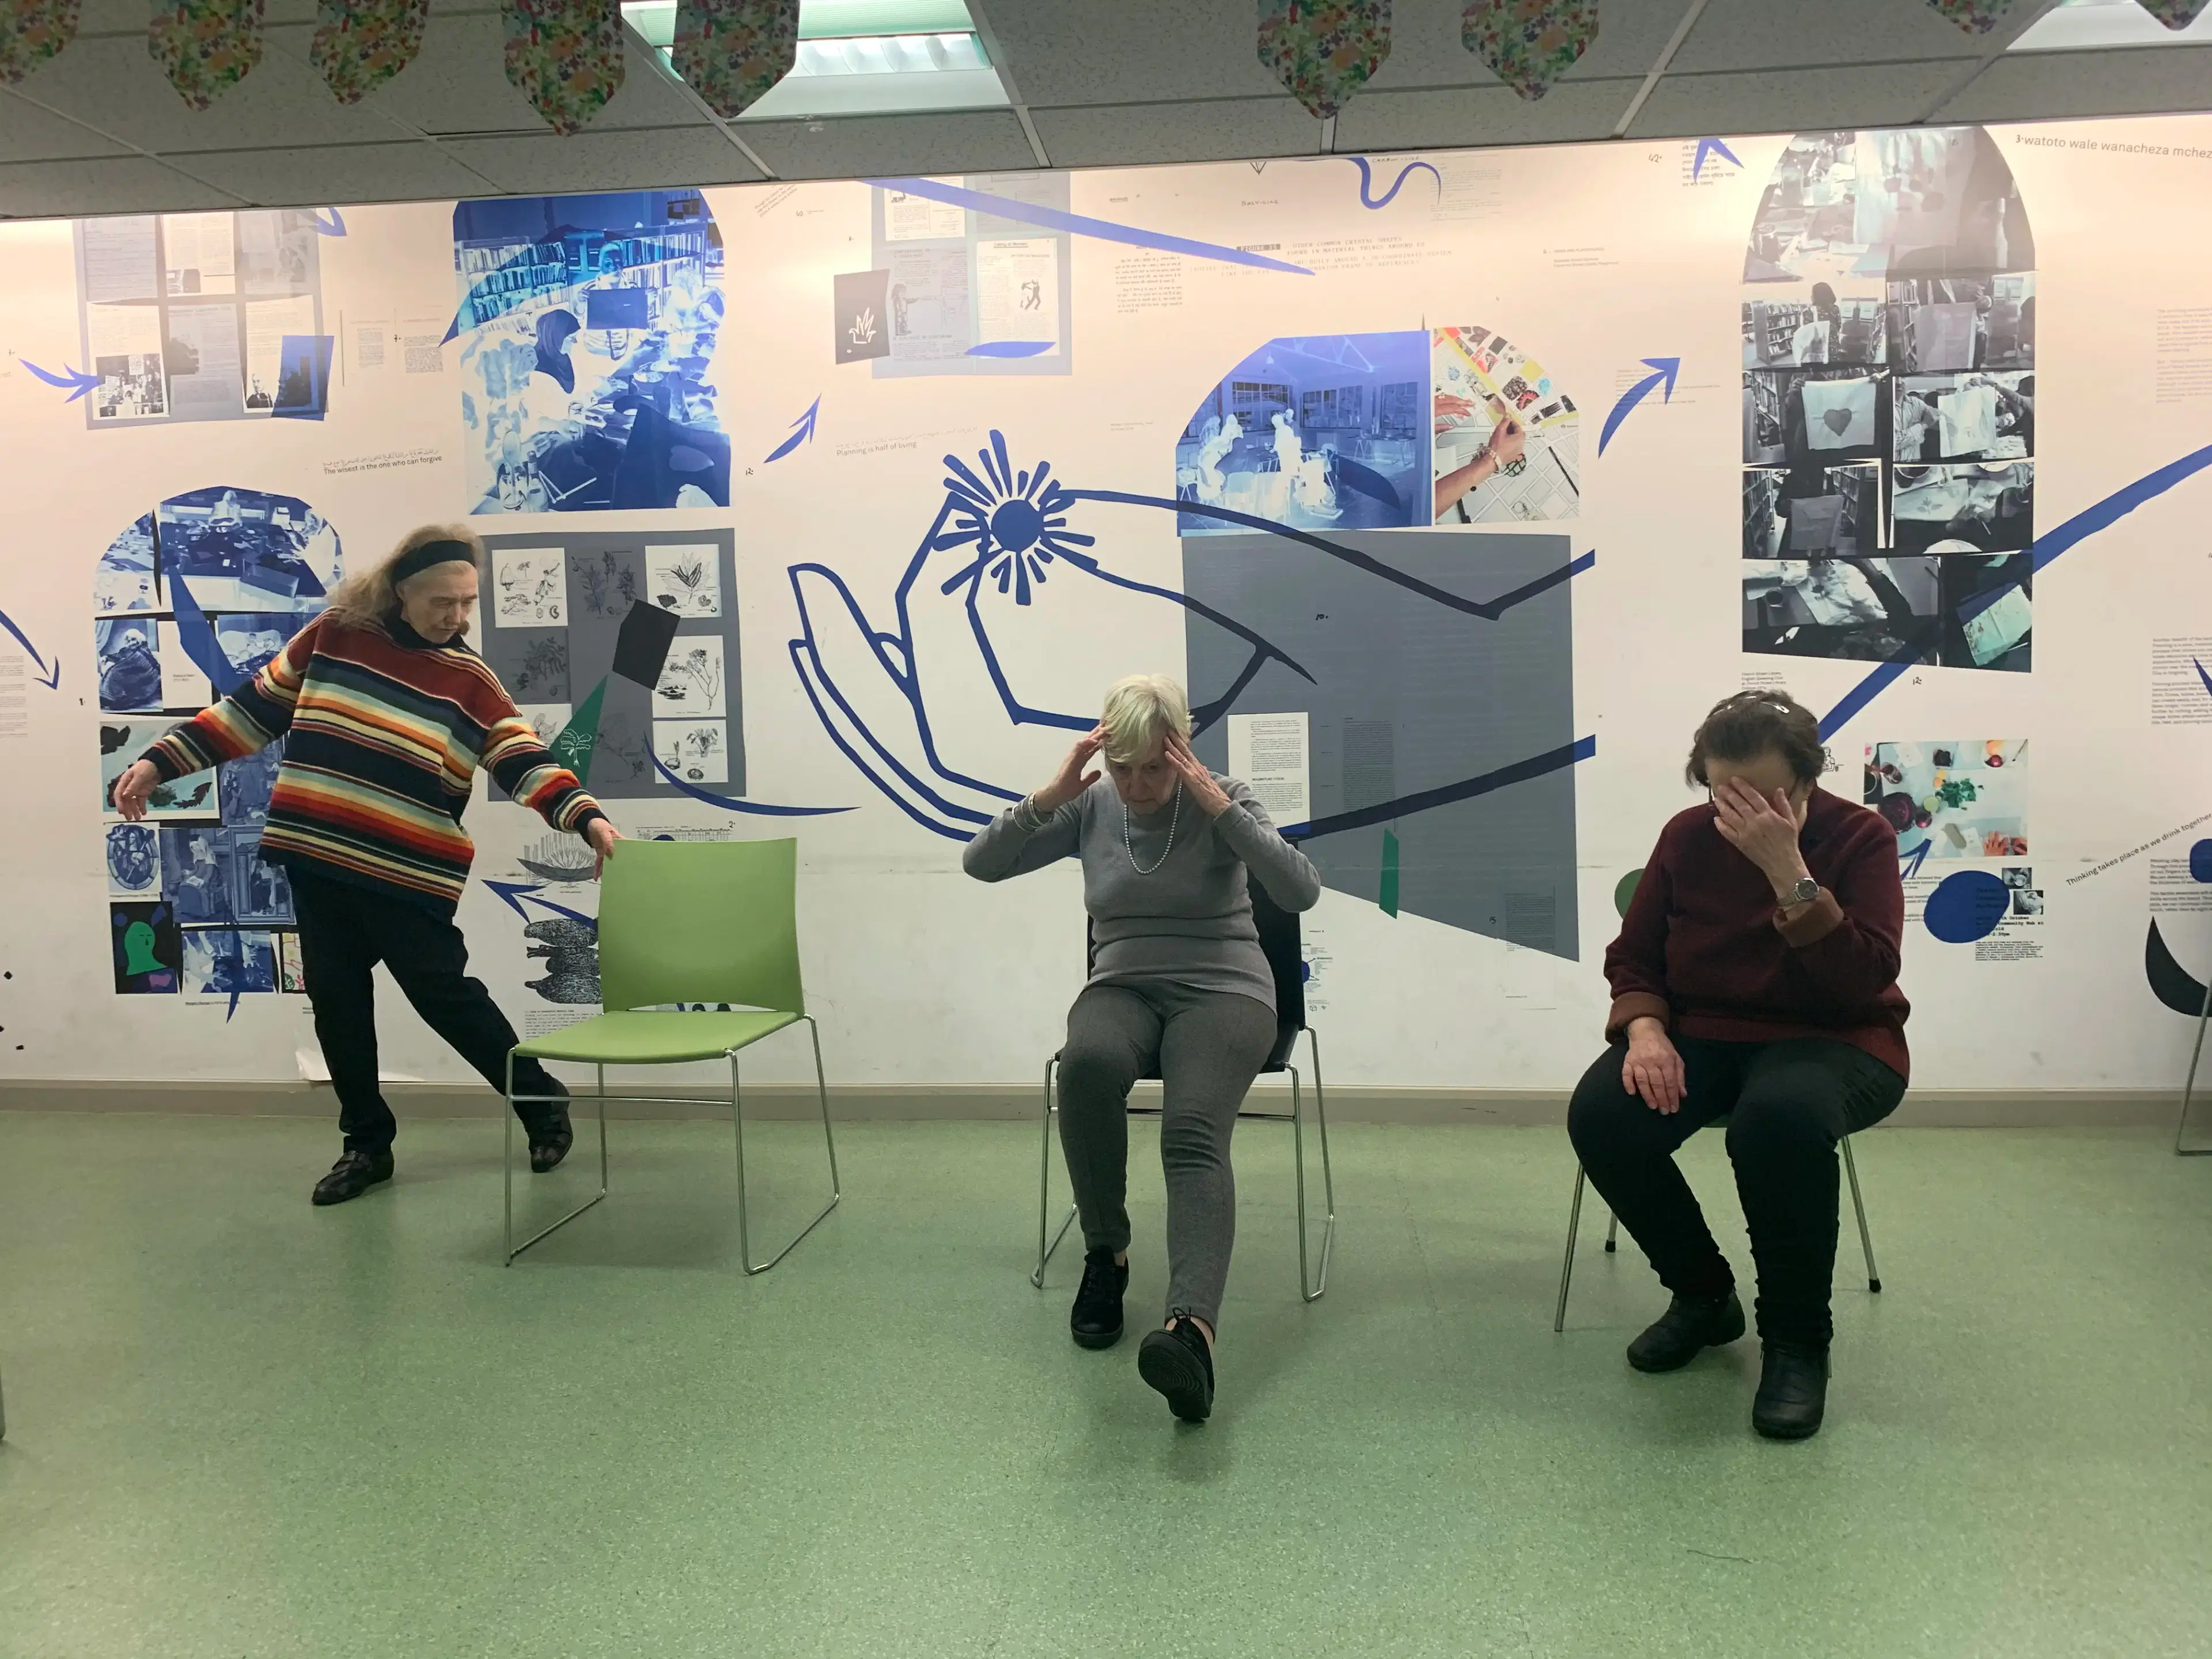 Three people in a room with illustrated walls experiencing a moment of playful chaos, as one person seems to be dancing, the middle one covers her eyes in jest, and the third looks amused, with chairs and a table suggesting a casual meeting or activity space.